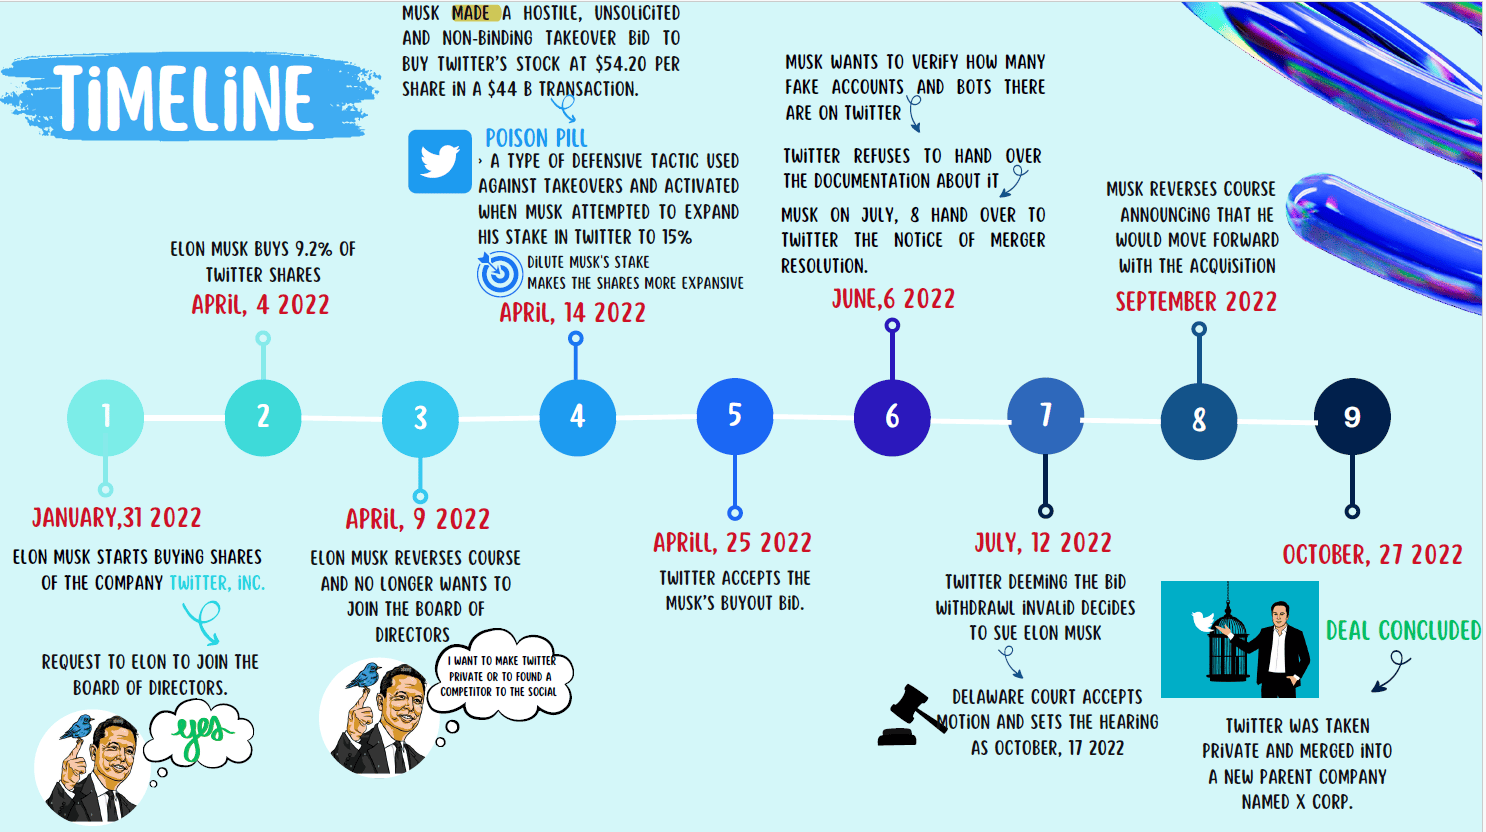 Elon Musk's Twitter Deal - Valuation and Financing of the Leveraged Buyout